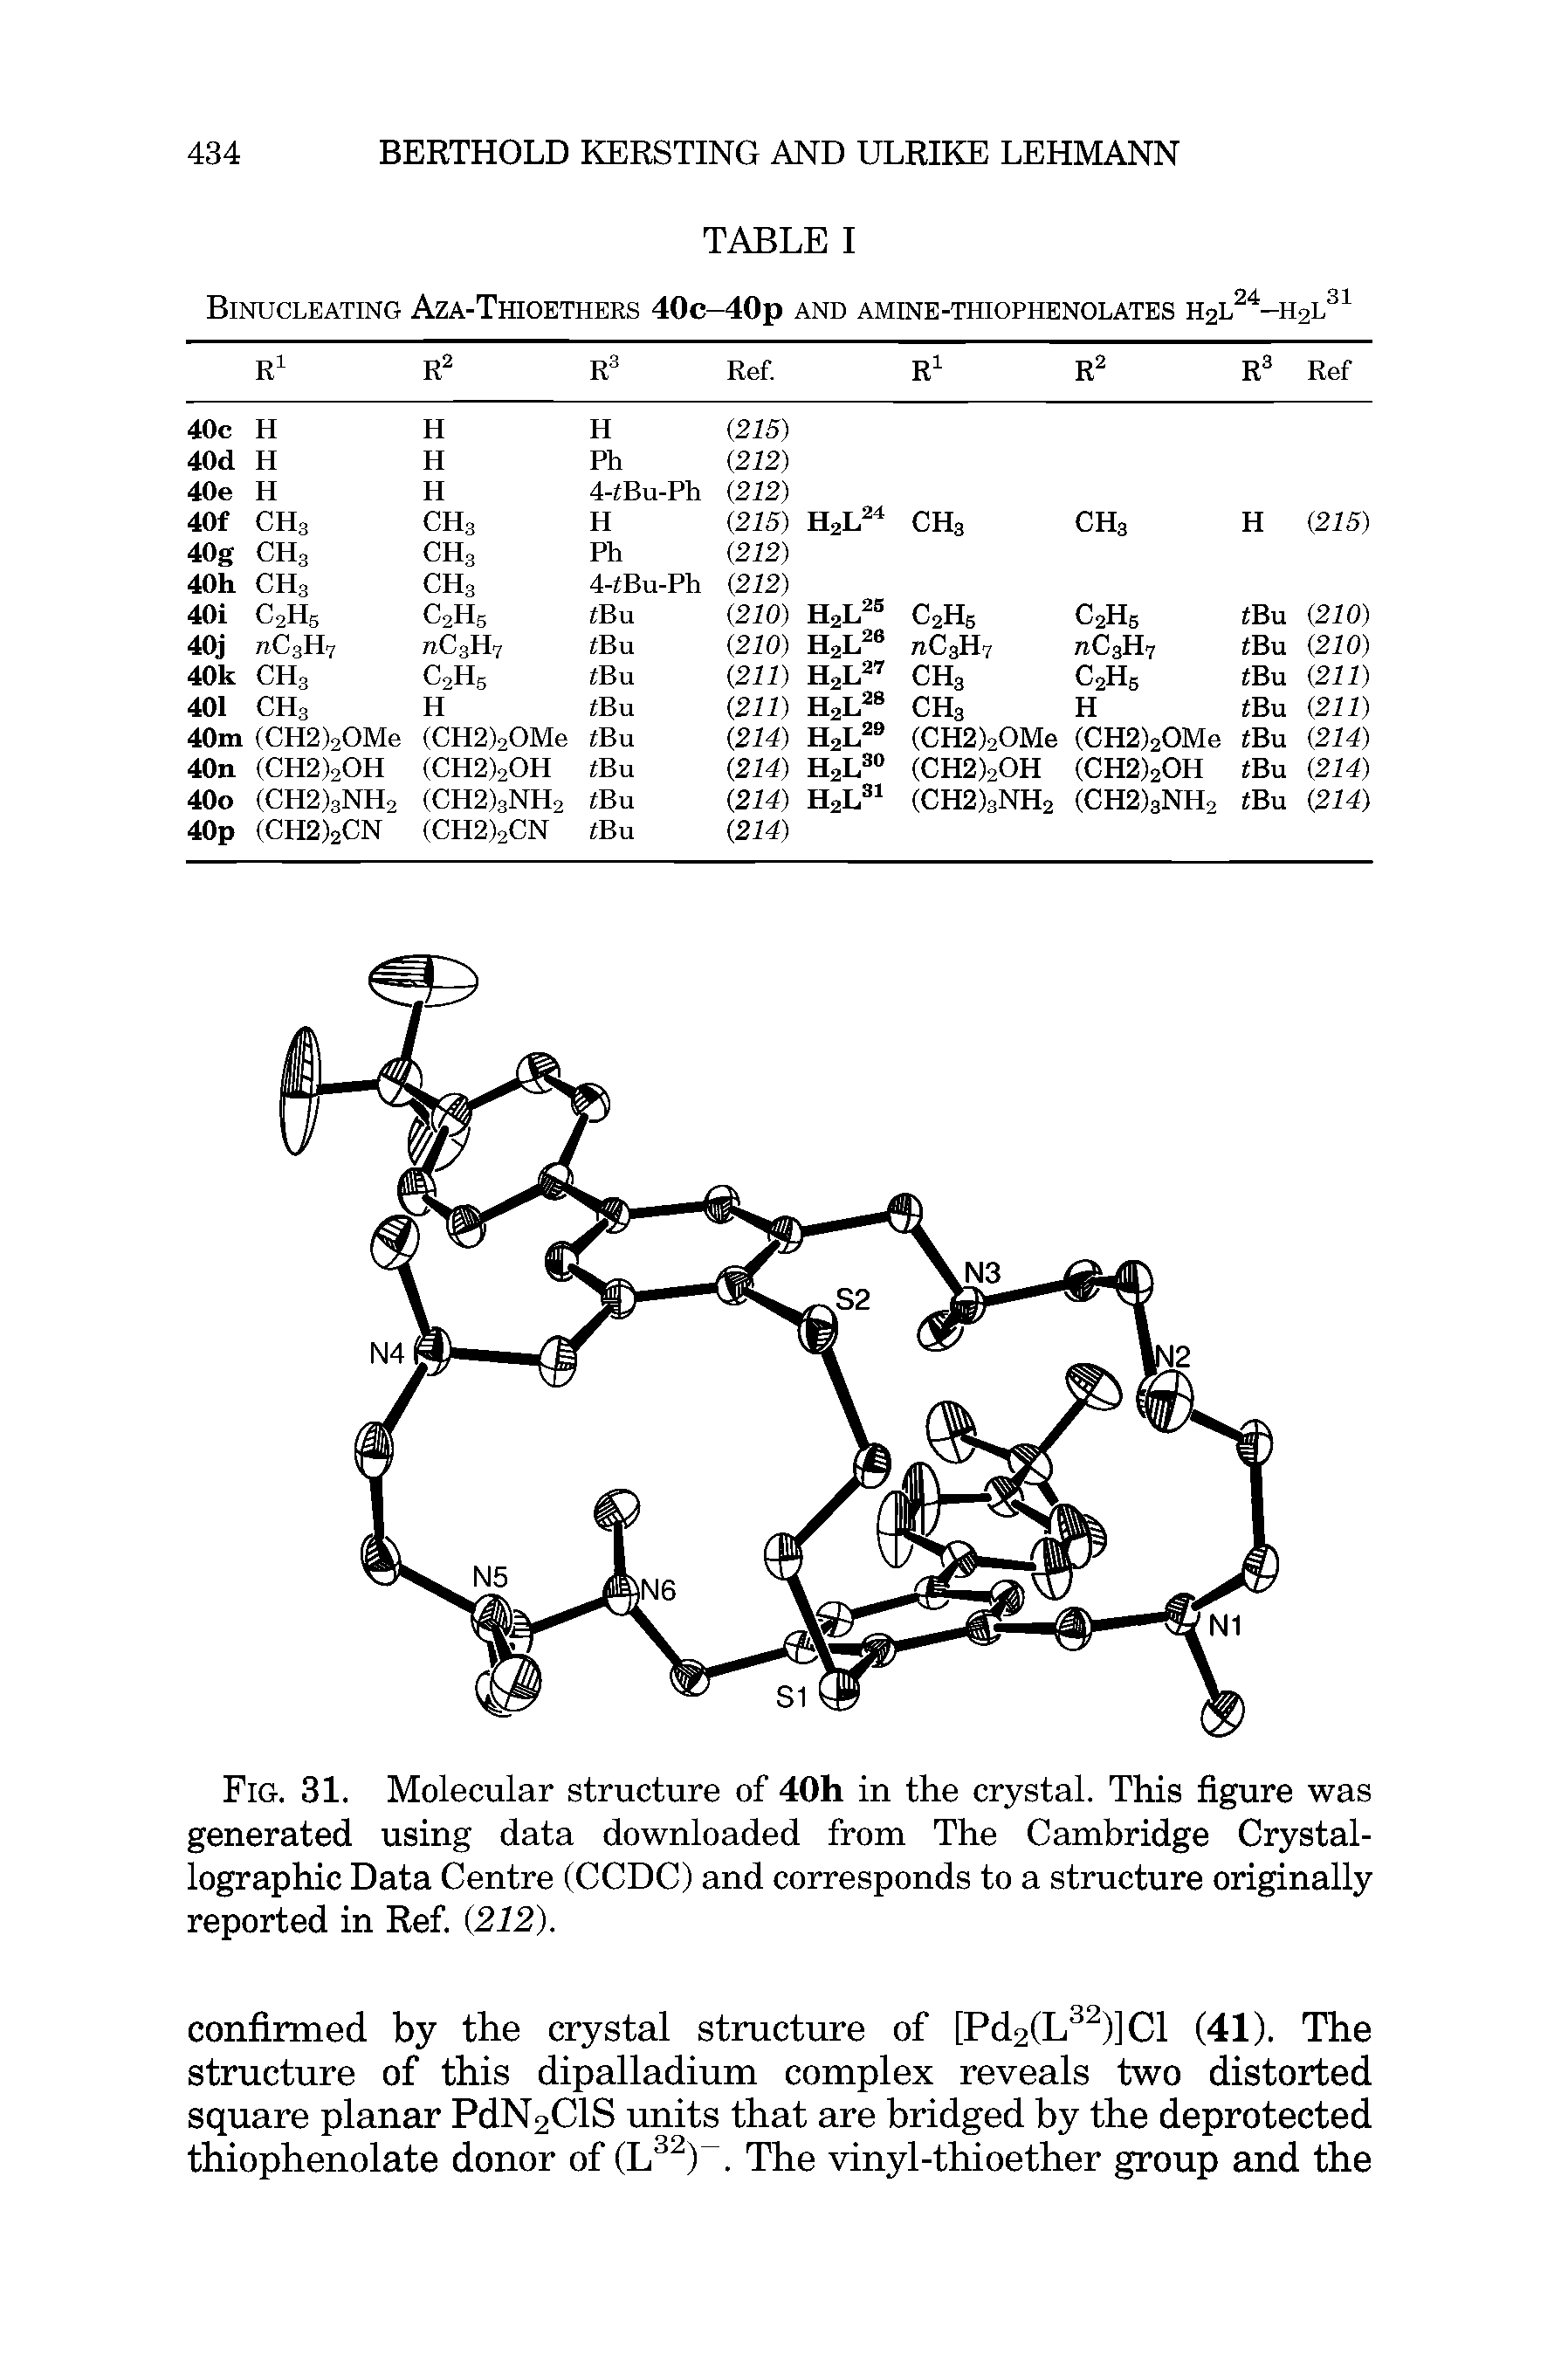 Fig. 31. Molecular structure of 40h in the crystal. This figure was generated using data downloaded from The Cambridge Crystallographic Data Centre (CCDC) and corresponds to a structure originally reported in Ref. (212).